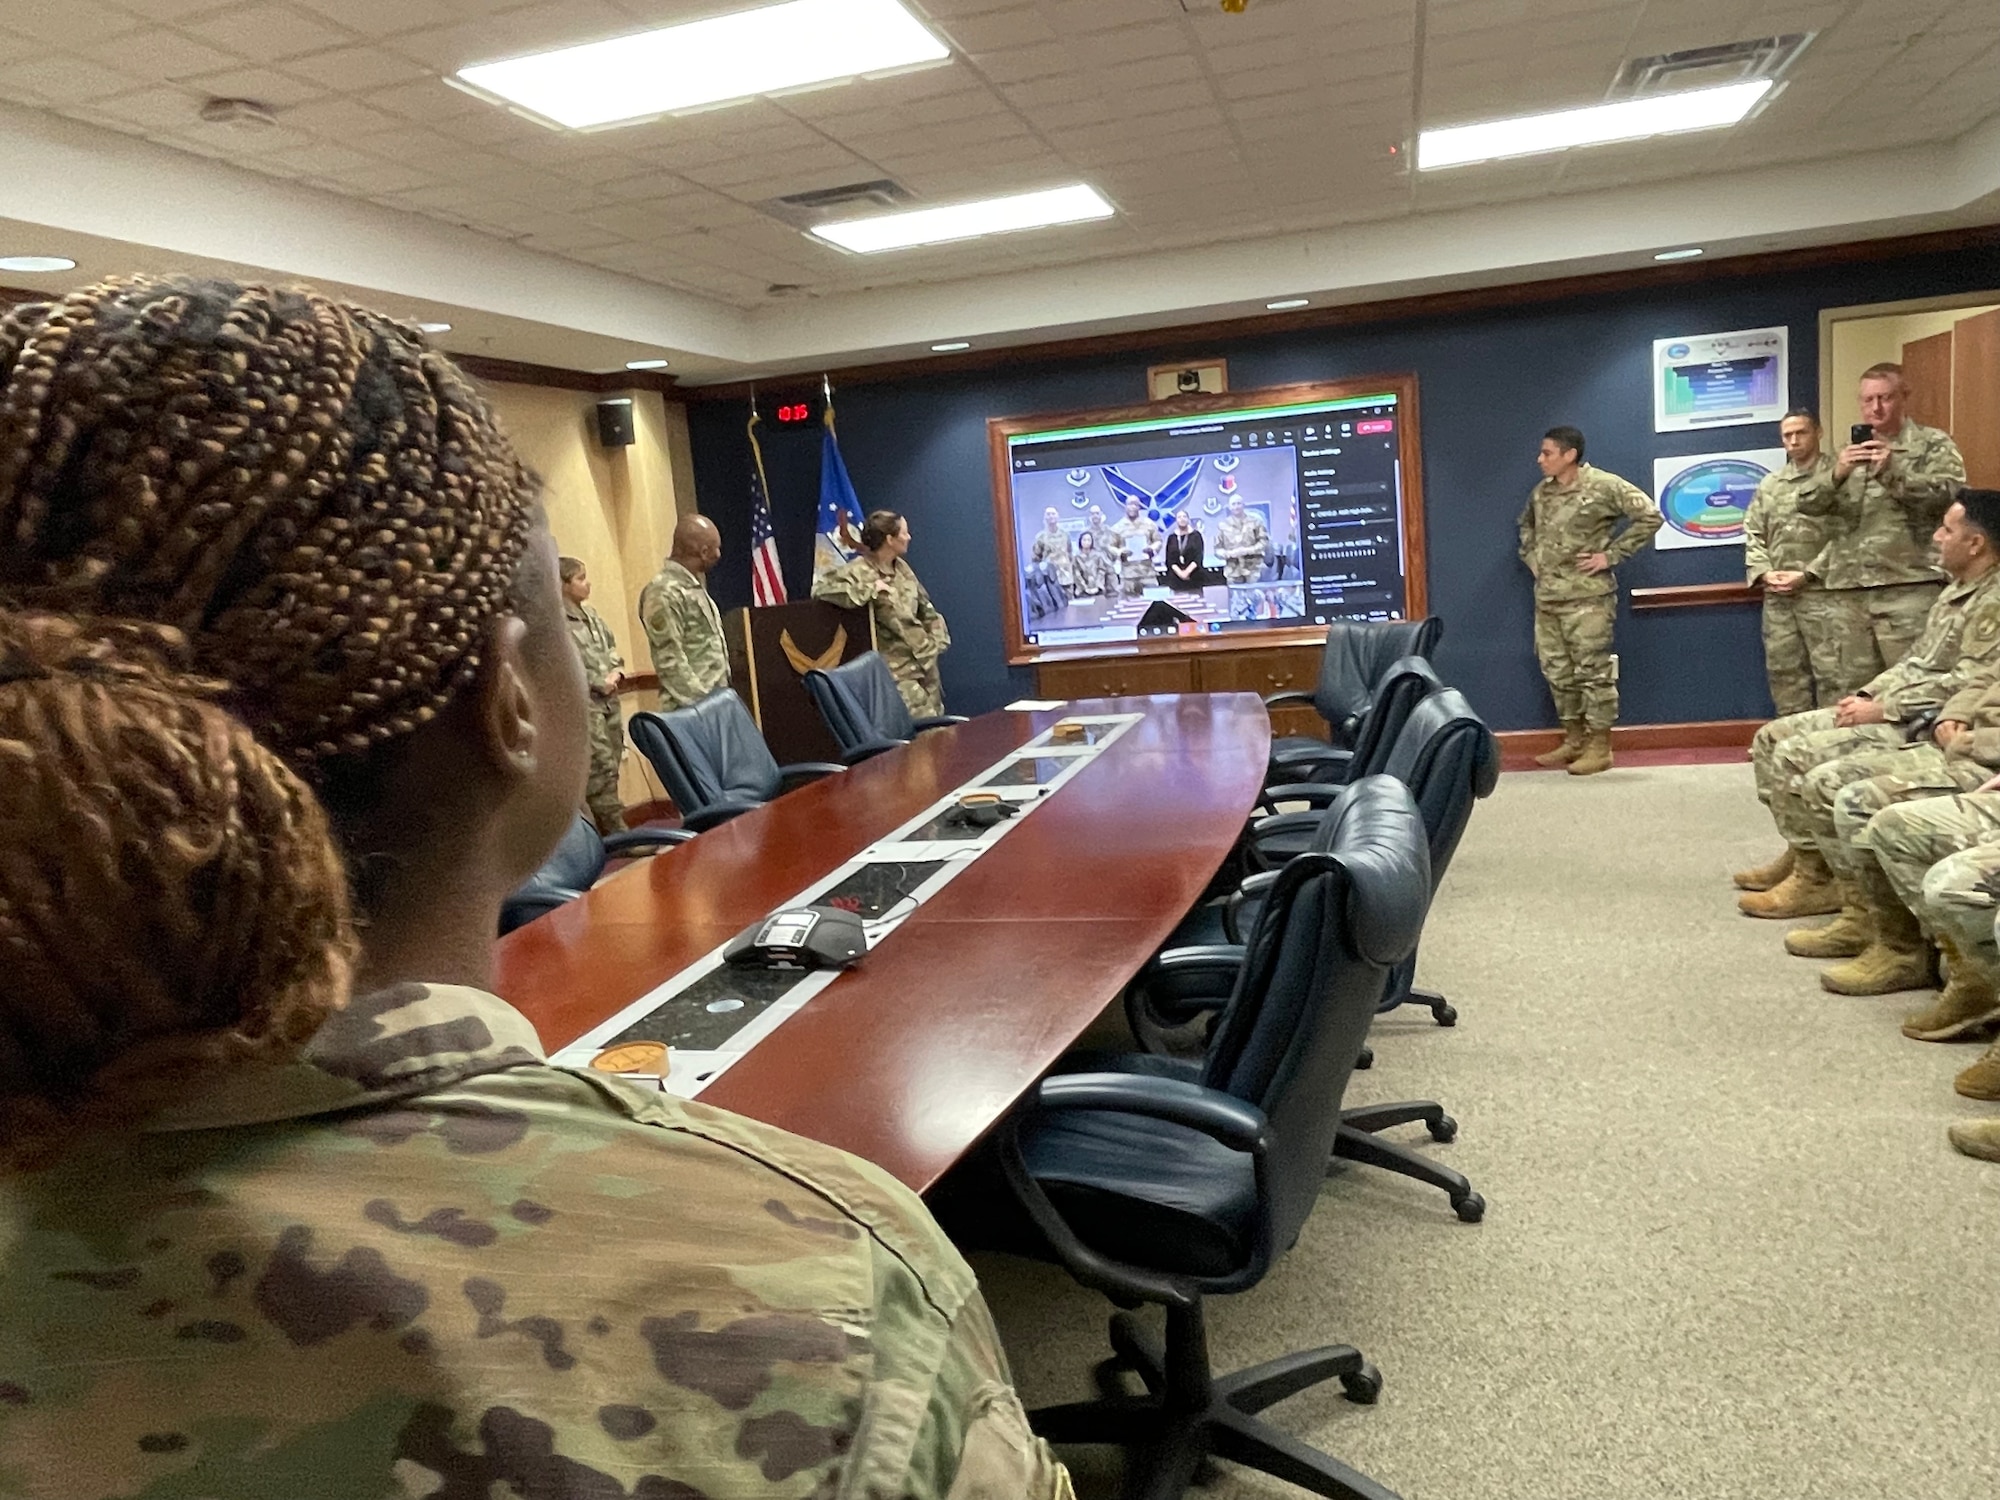 Team Robins watches as Air Force Sustainment Center Commander, Lt. Gen. Stacey T. Hawkins promoted two 78th Logistics Readiness Squadron members member via video teleconference from Tinker AFB, Oklahoma. (U.S. Air Force Photo by Kent Cummins)